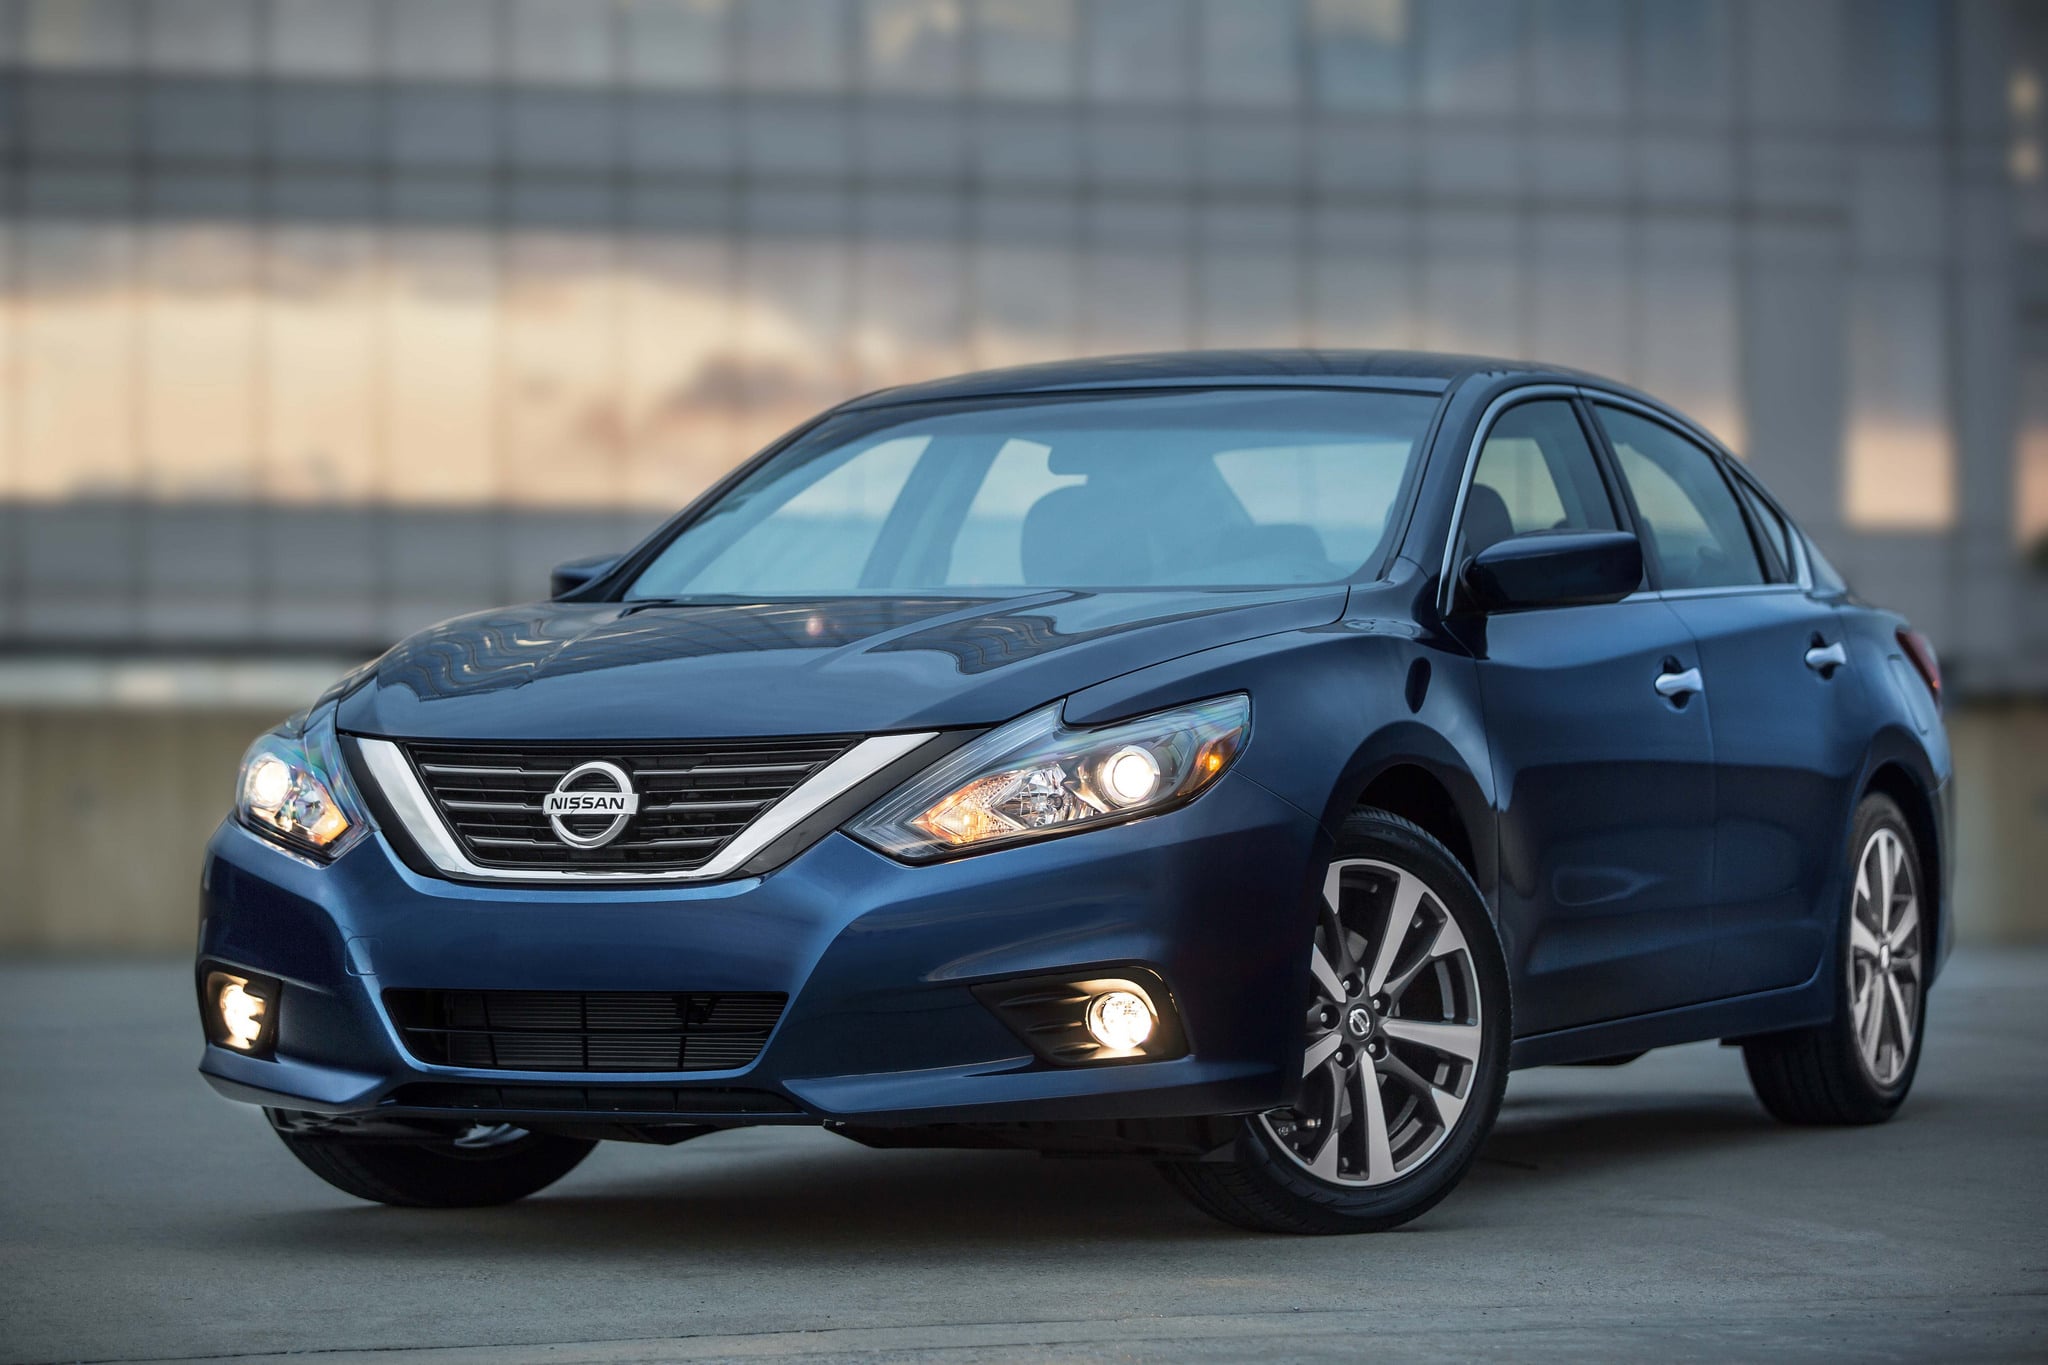 Nissan Altima Wallpaper HD Pictures